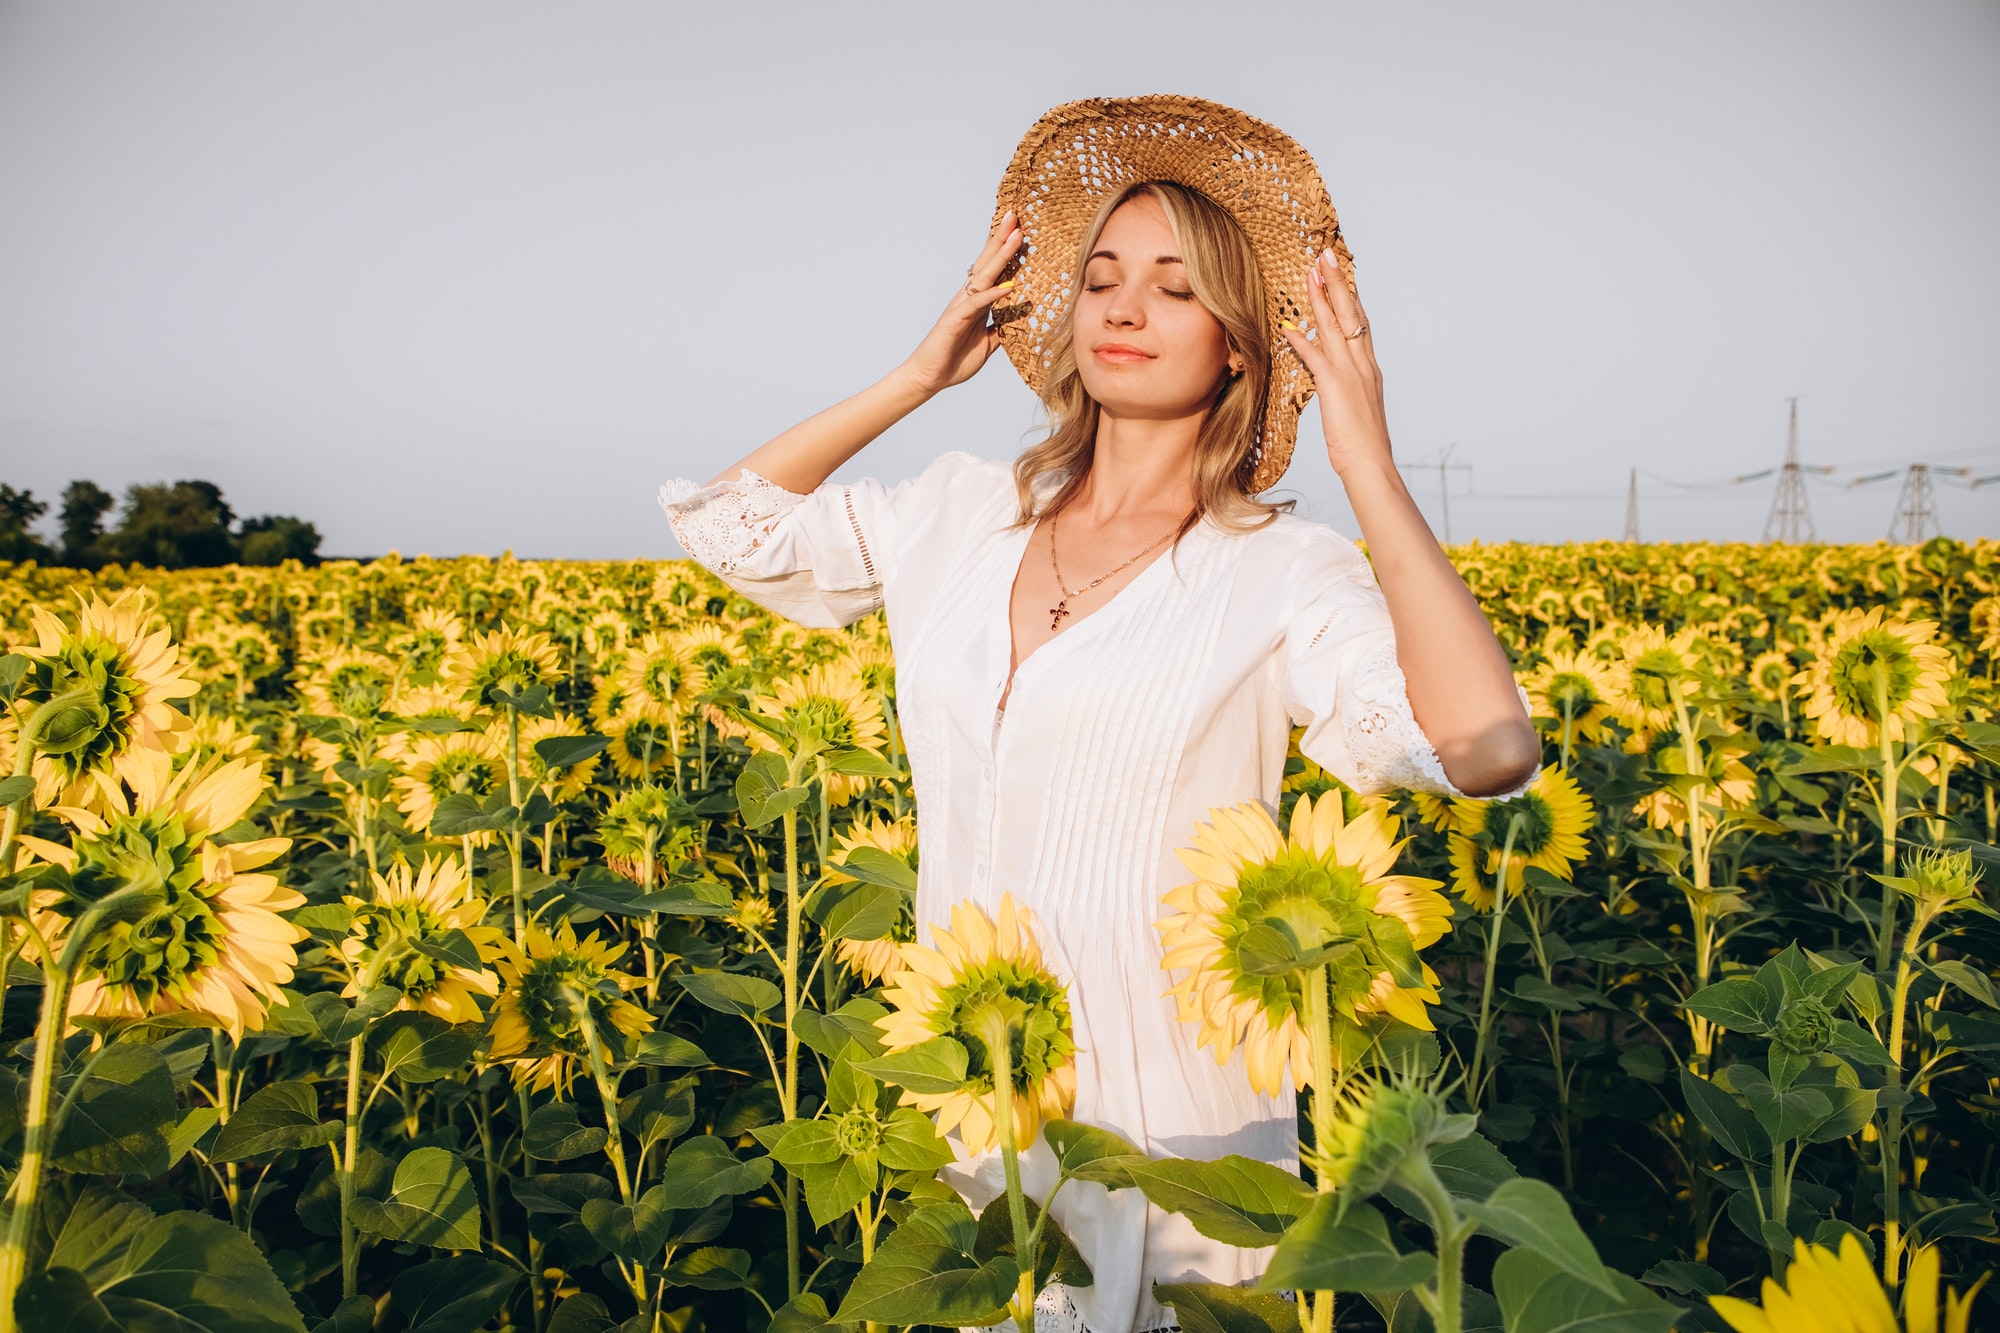 Girl in a straw hat and a sundress in a field of sunflowers